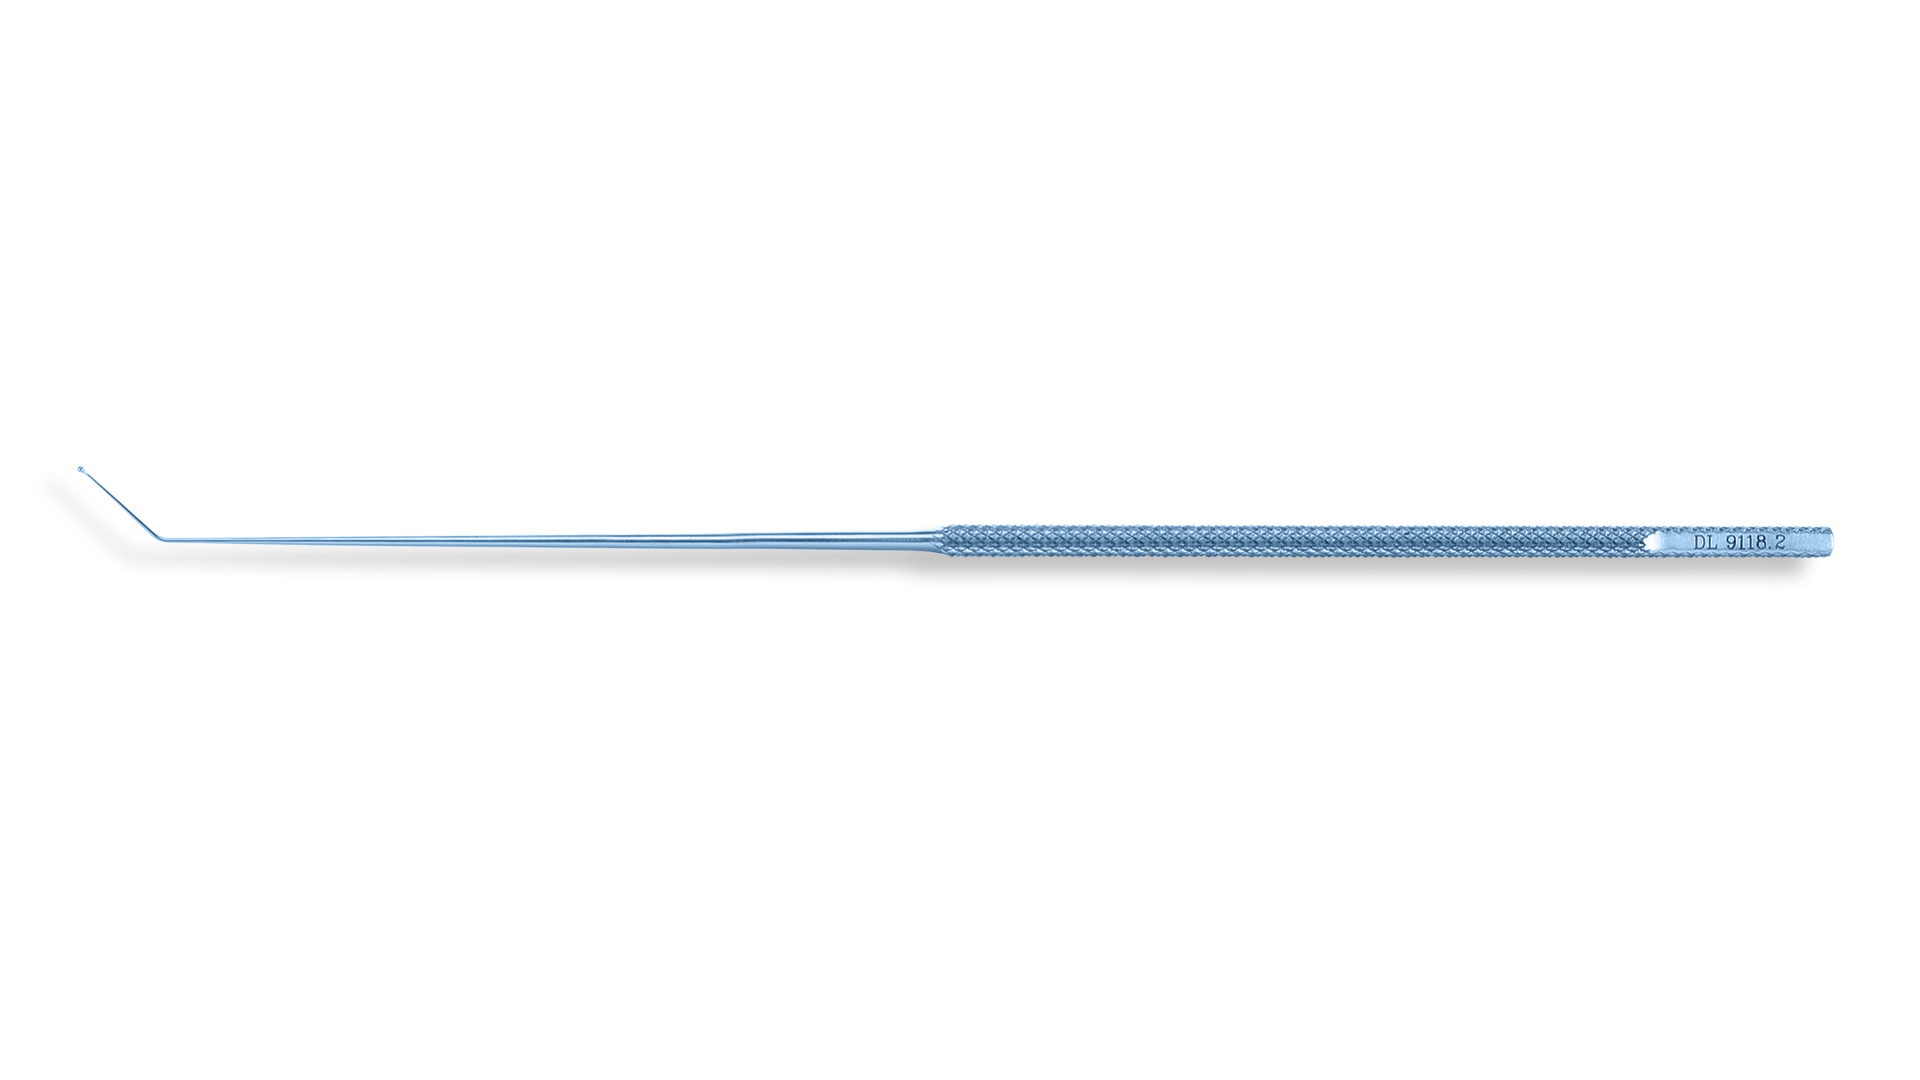 Micro Teardrop Dissector - 45° Angled 8mm tip